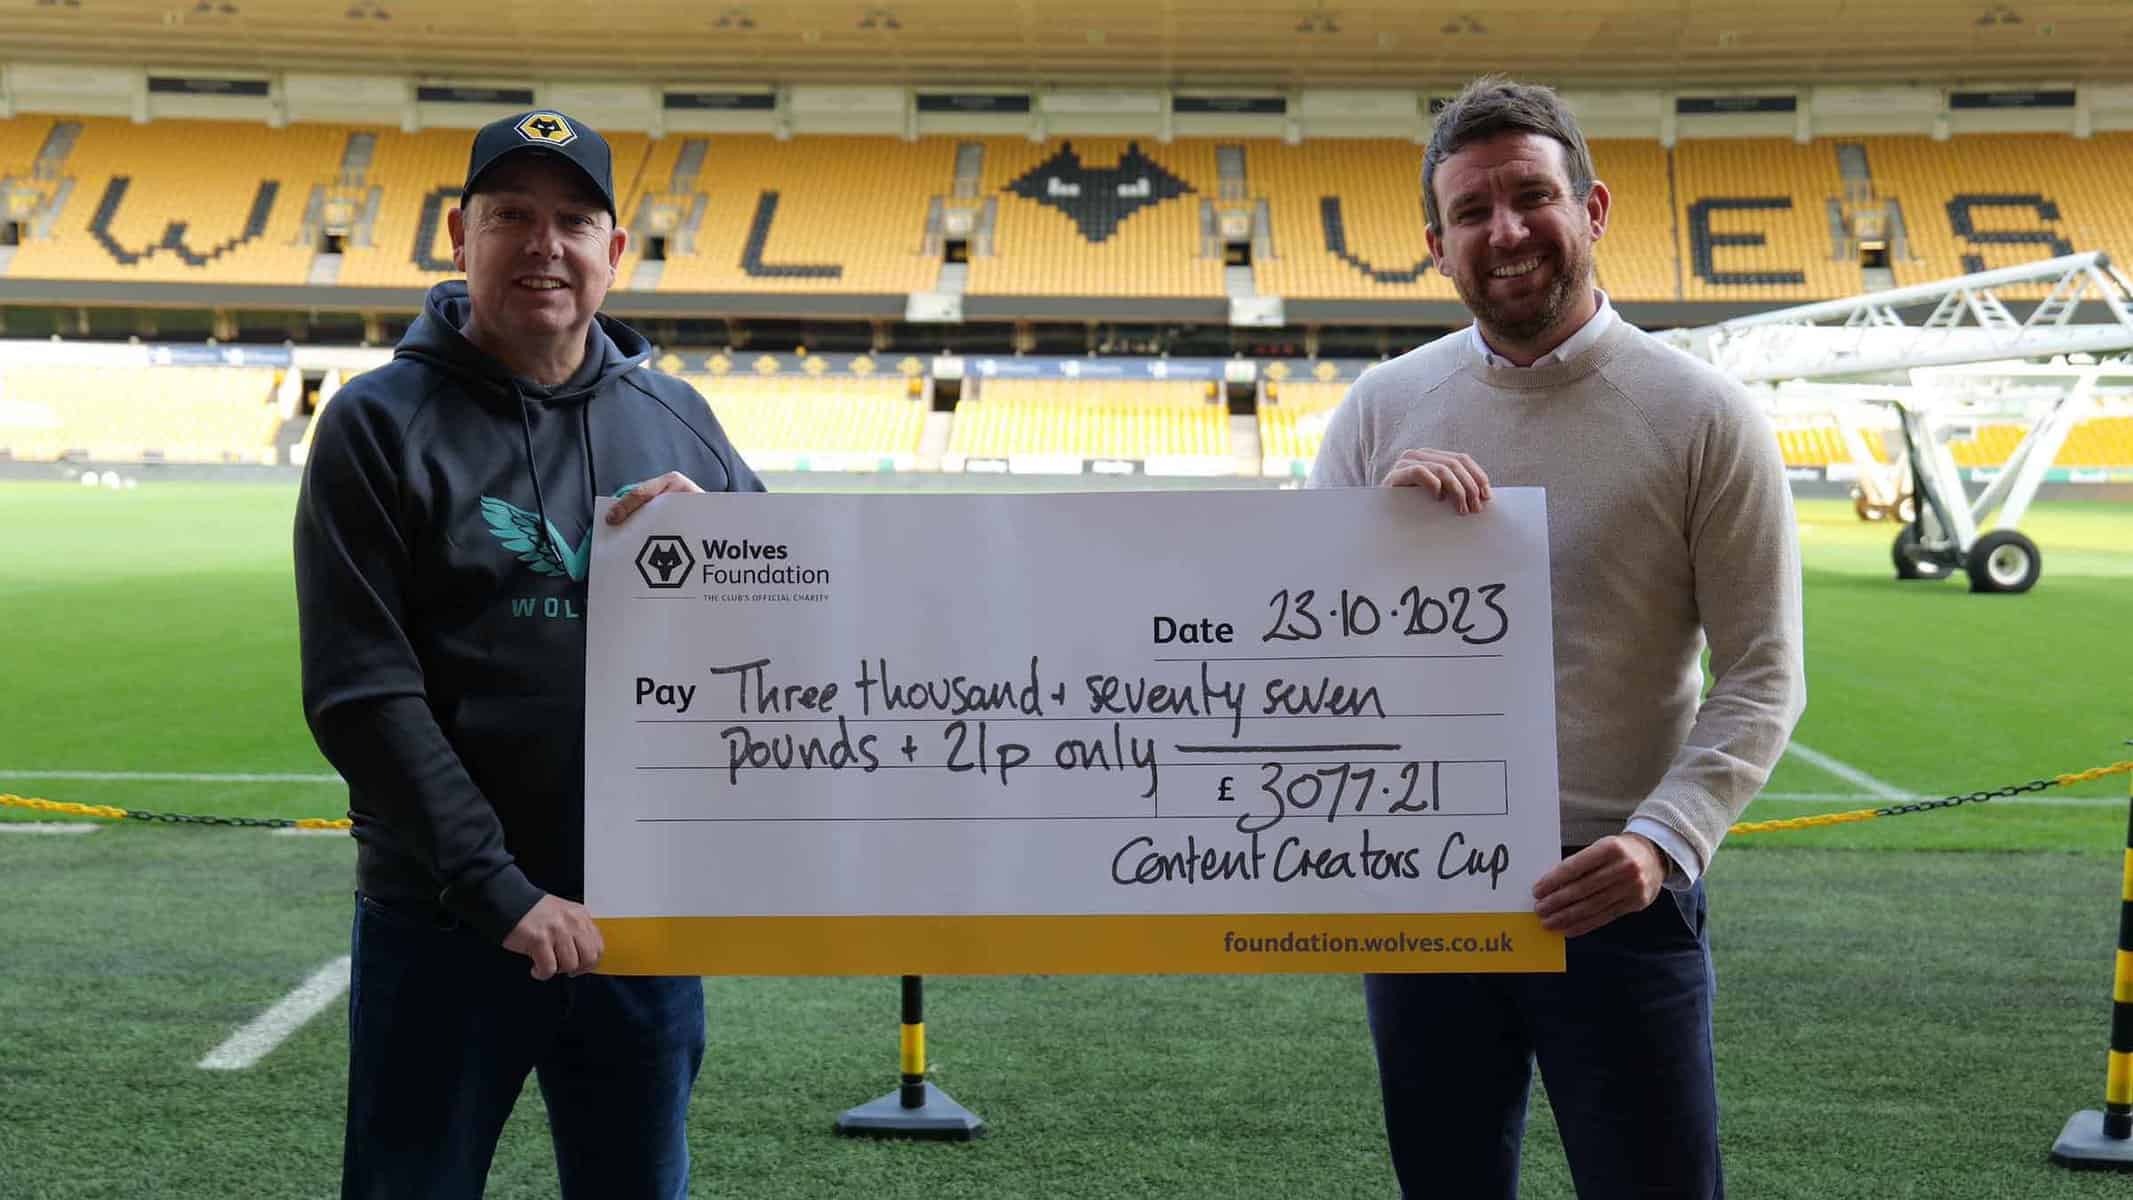 Content creators get competitive for Wolves Foundation Image